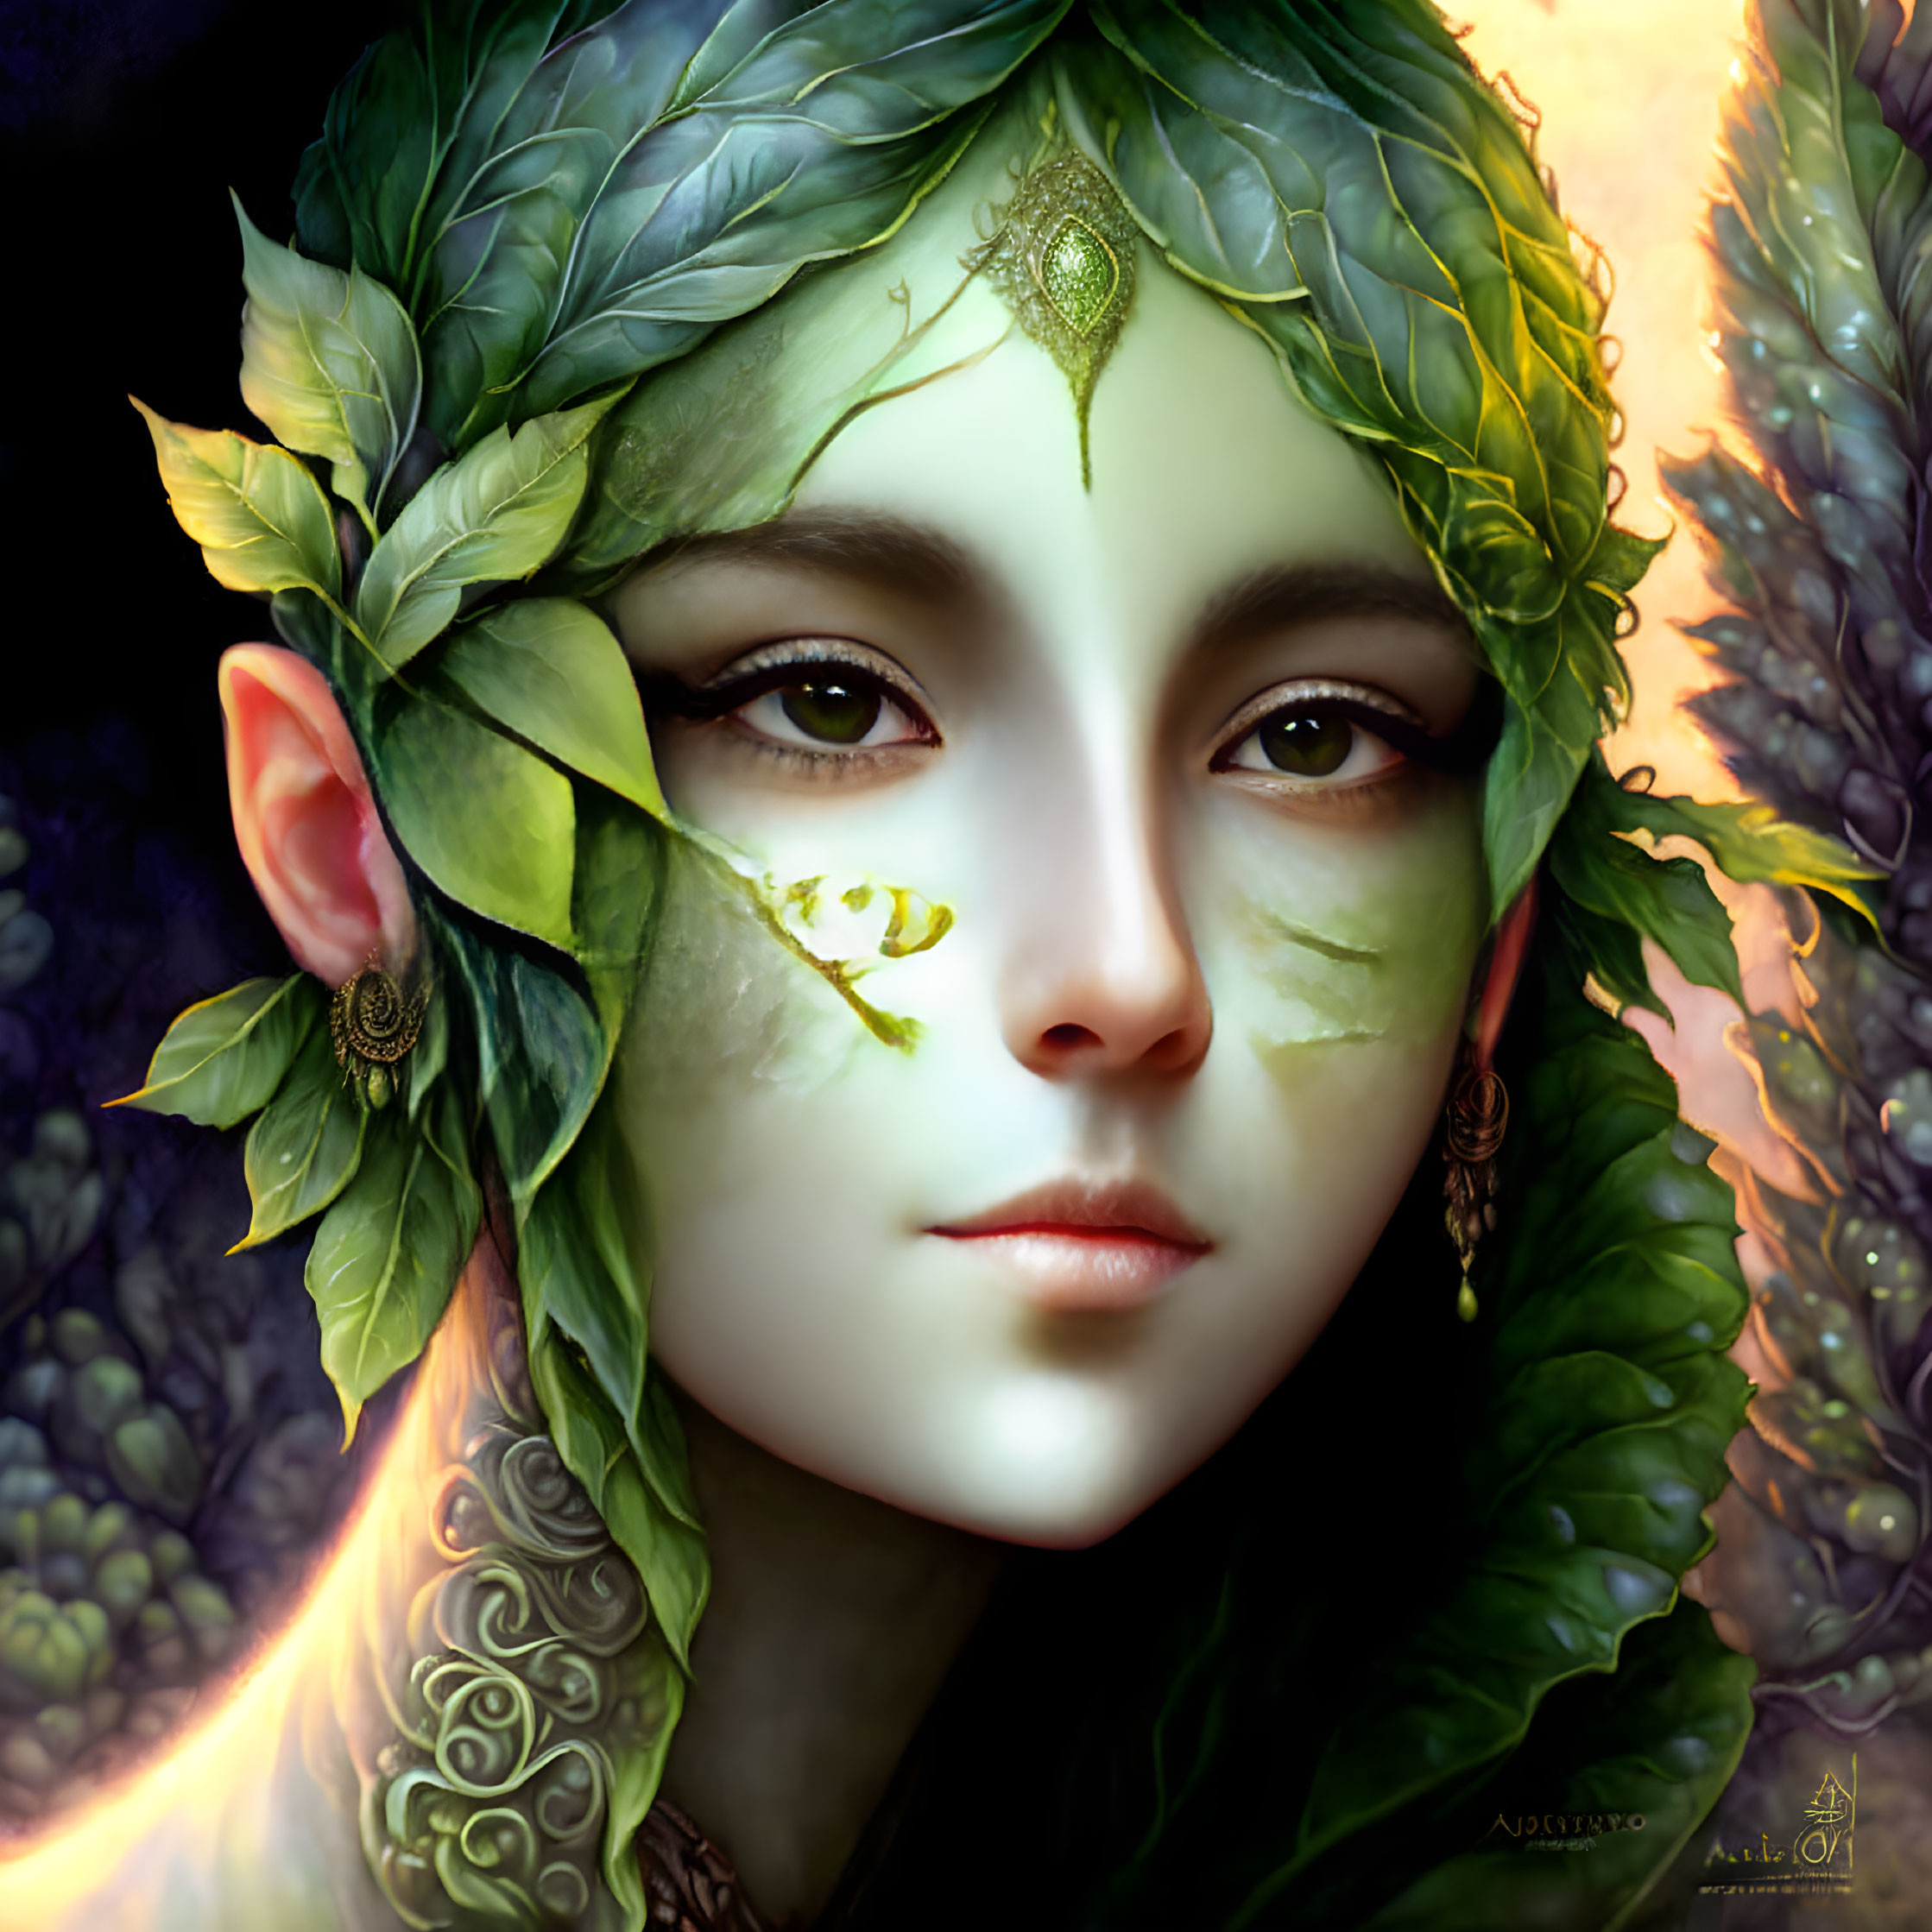 Fantasy portrait: person with leaf-shaped ears, green facial markings, gold jewelry, nature-inspired aura